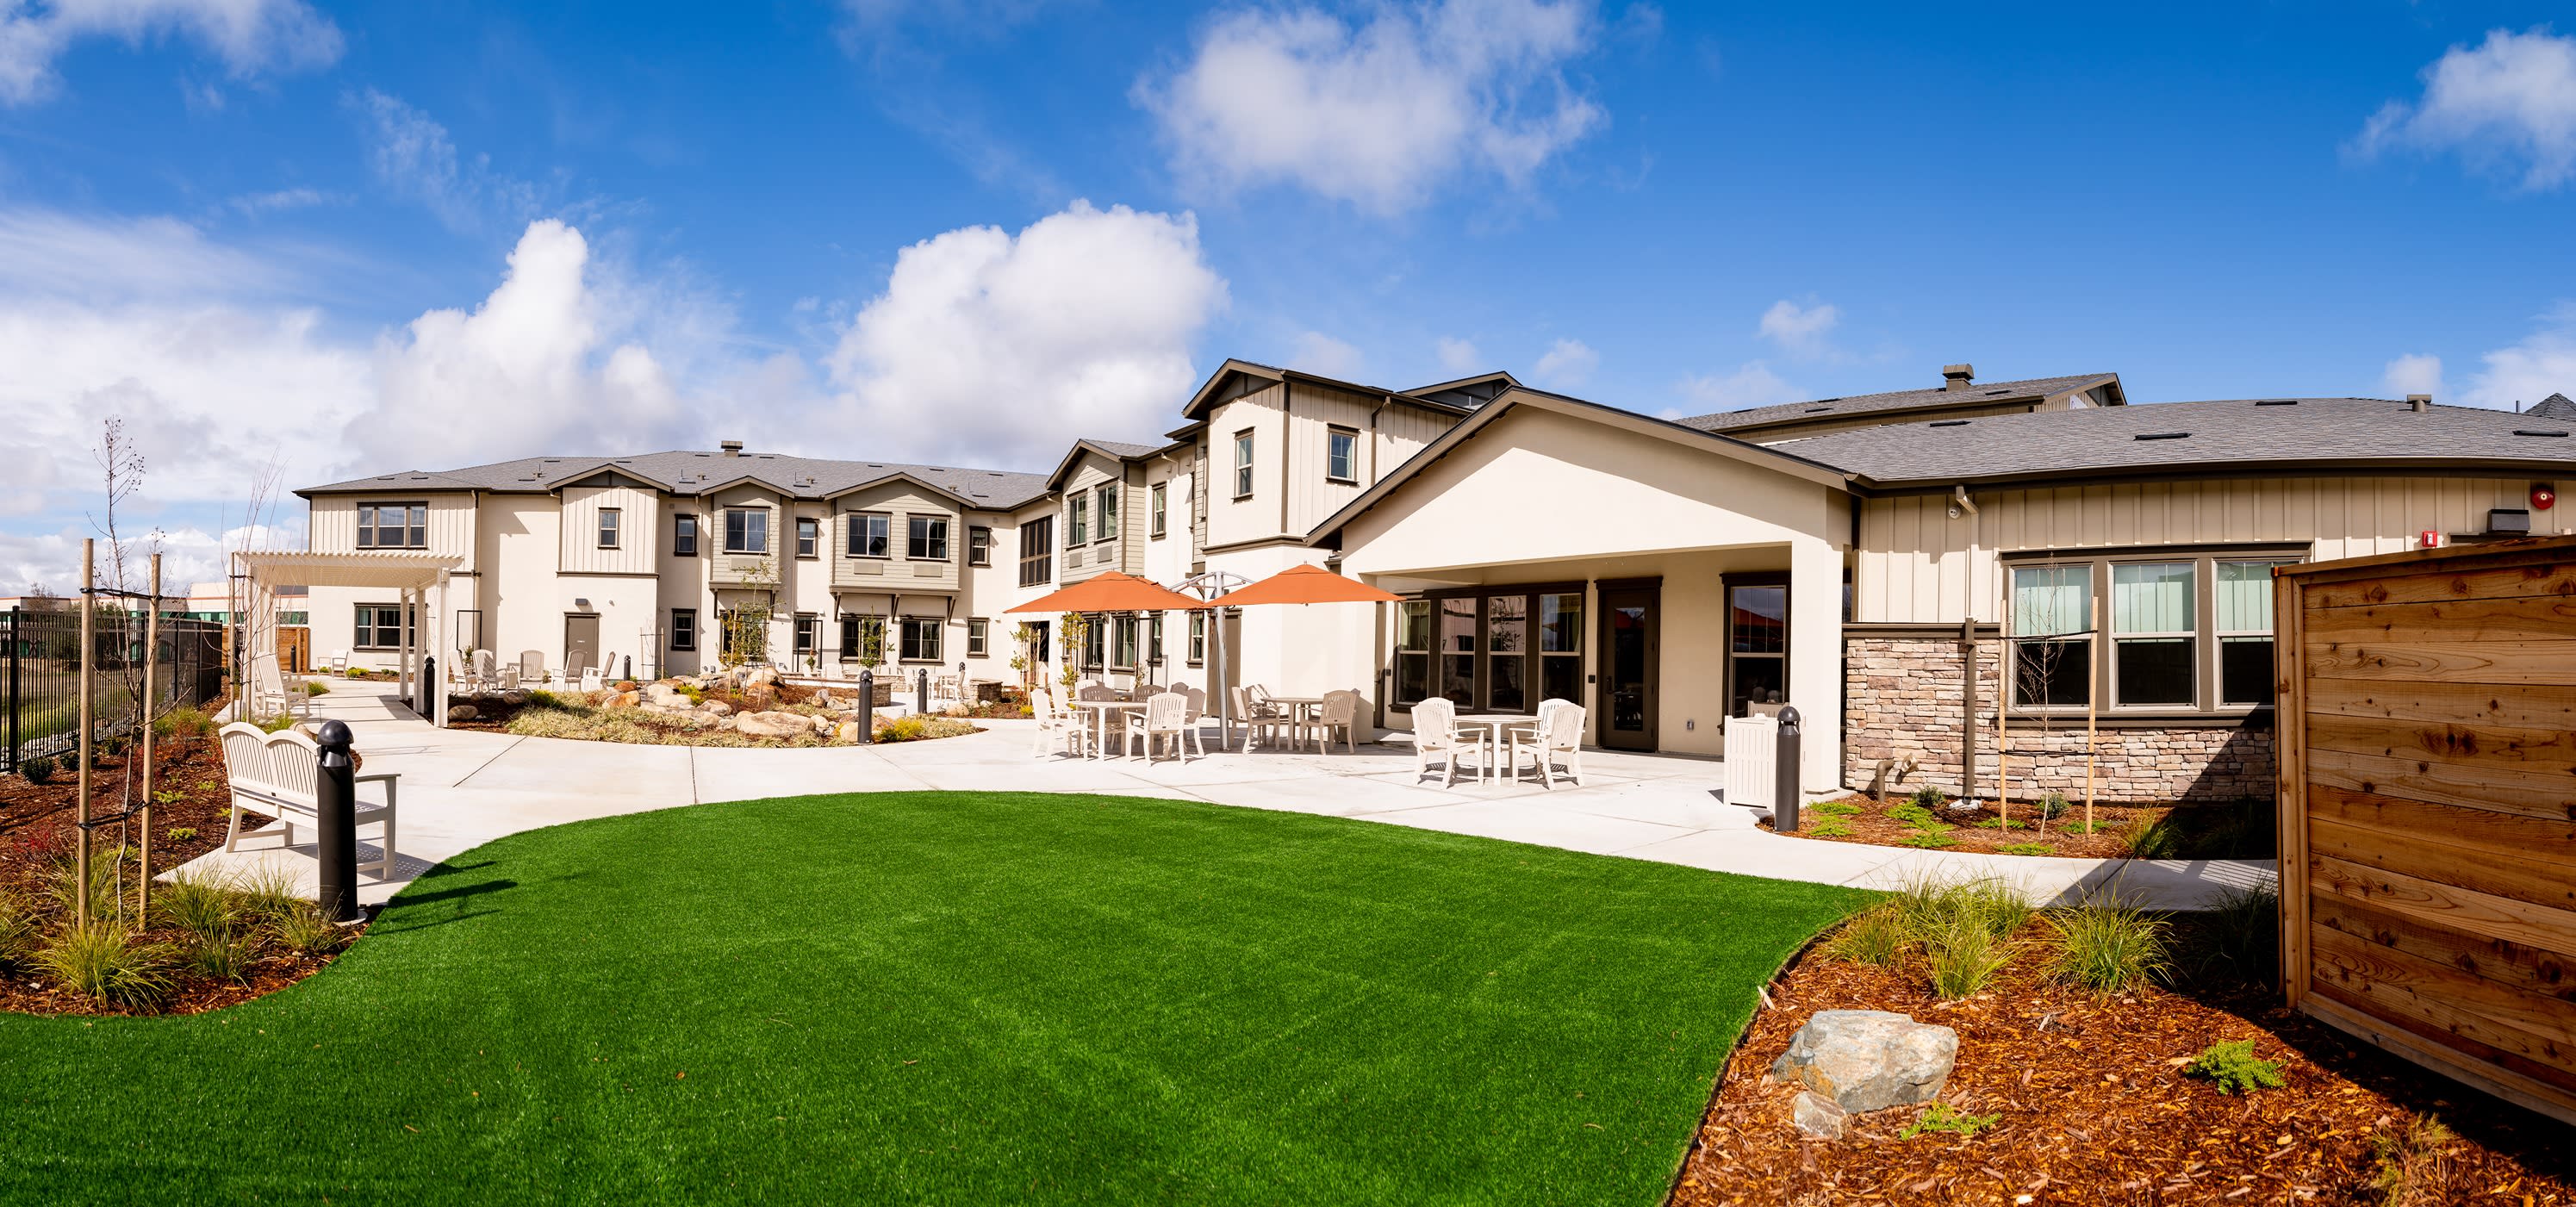 CountryHouse at Folsom community exterior